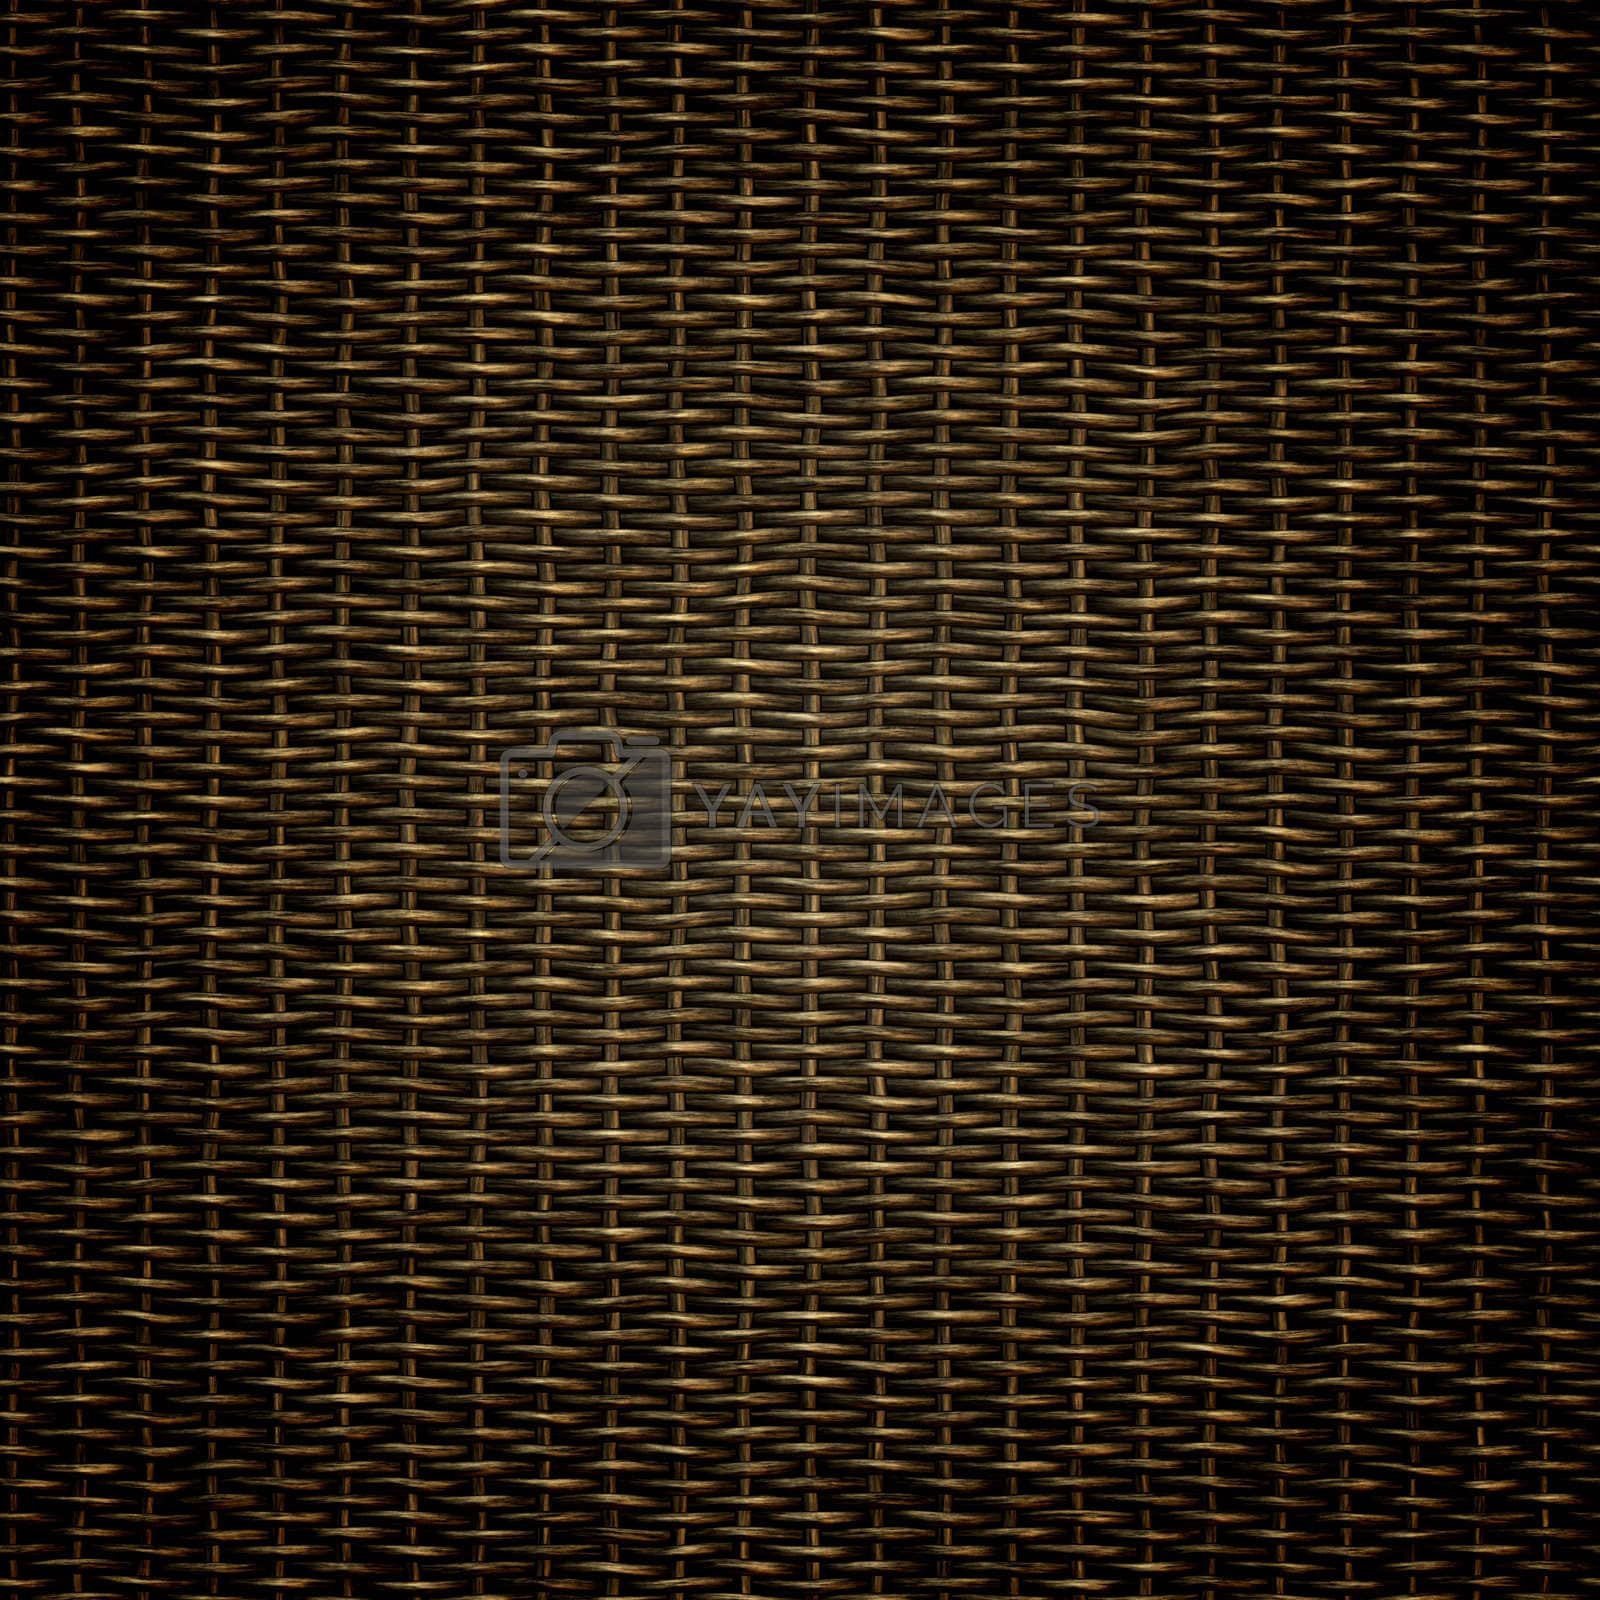 Royalty free image of wooden weave background by magann